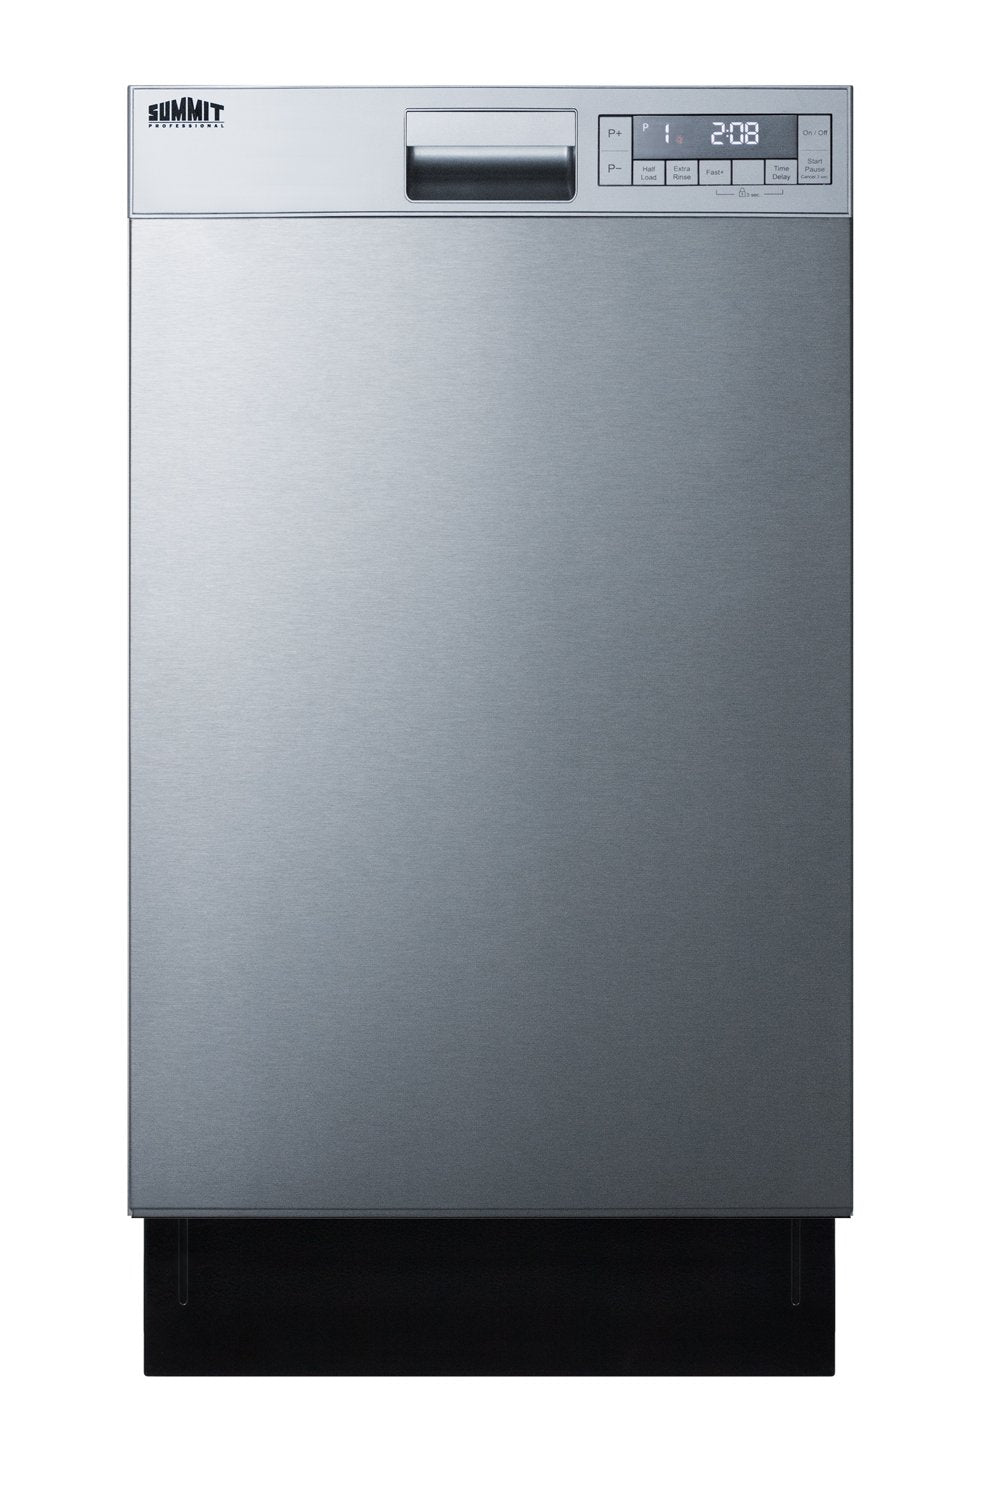 SUMMIT 18 in. Built-In Dishwasher in Stainless Steel (DW18SS4)